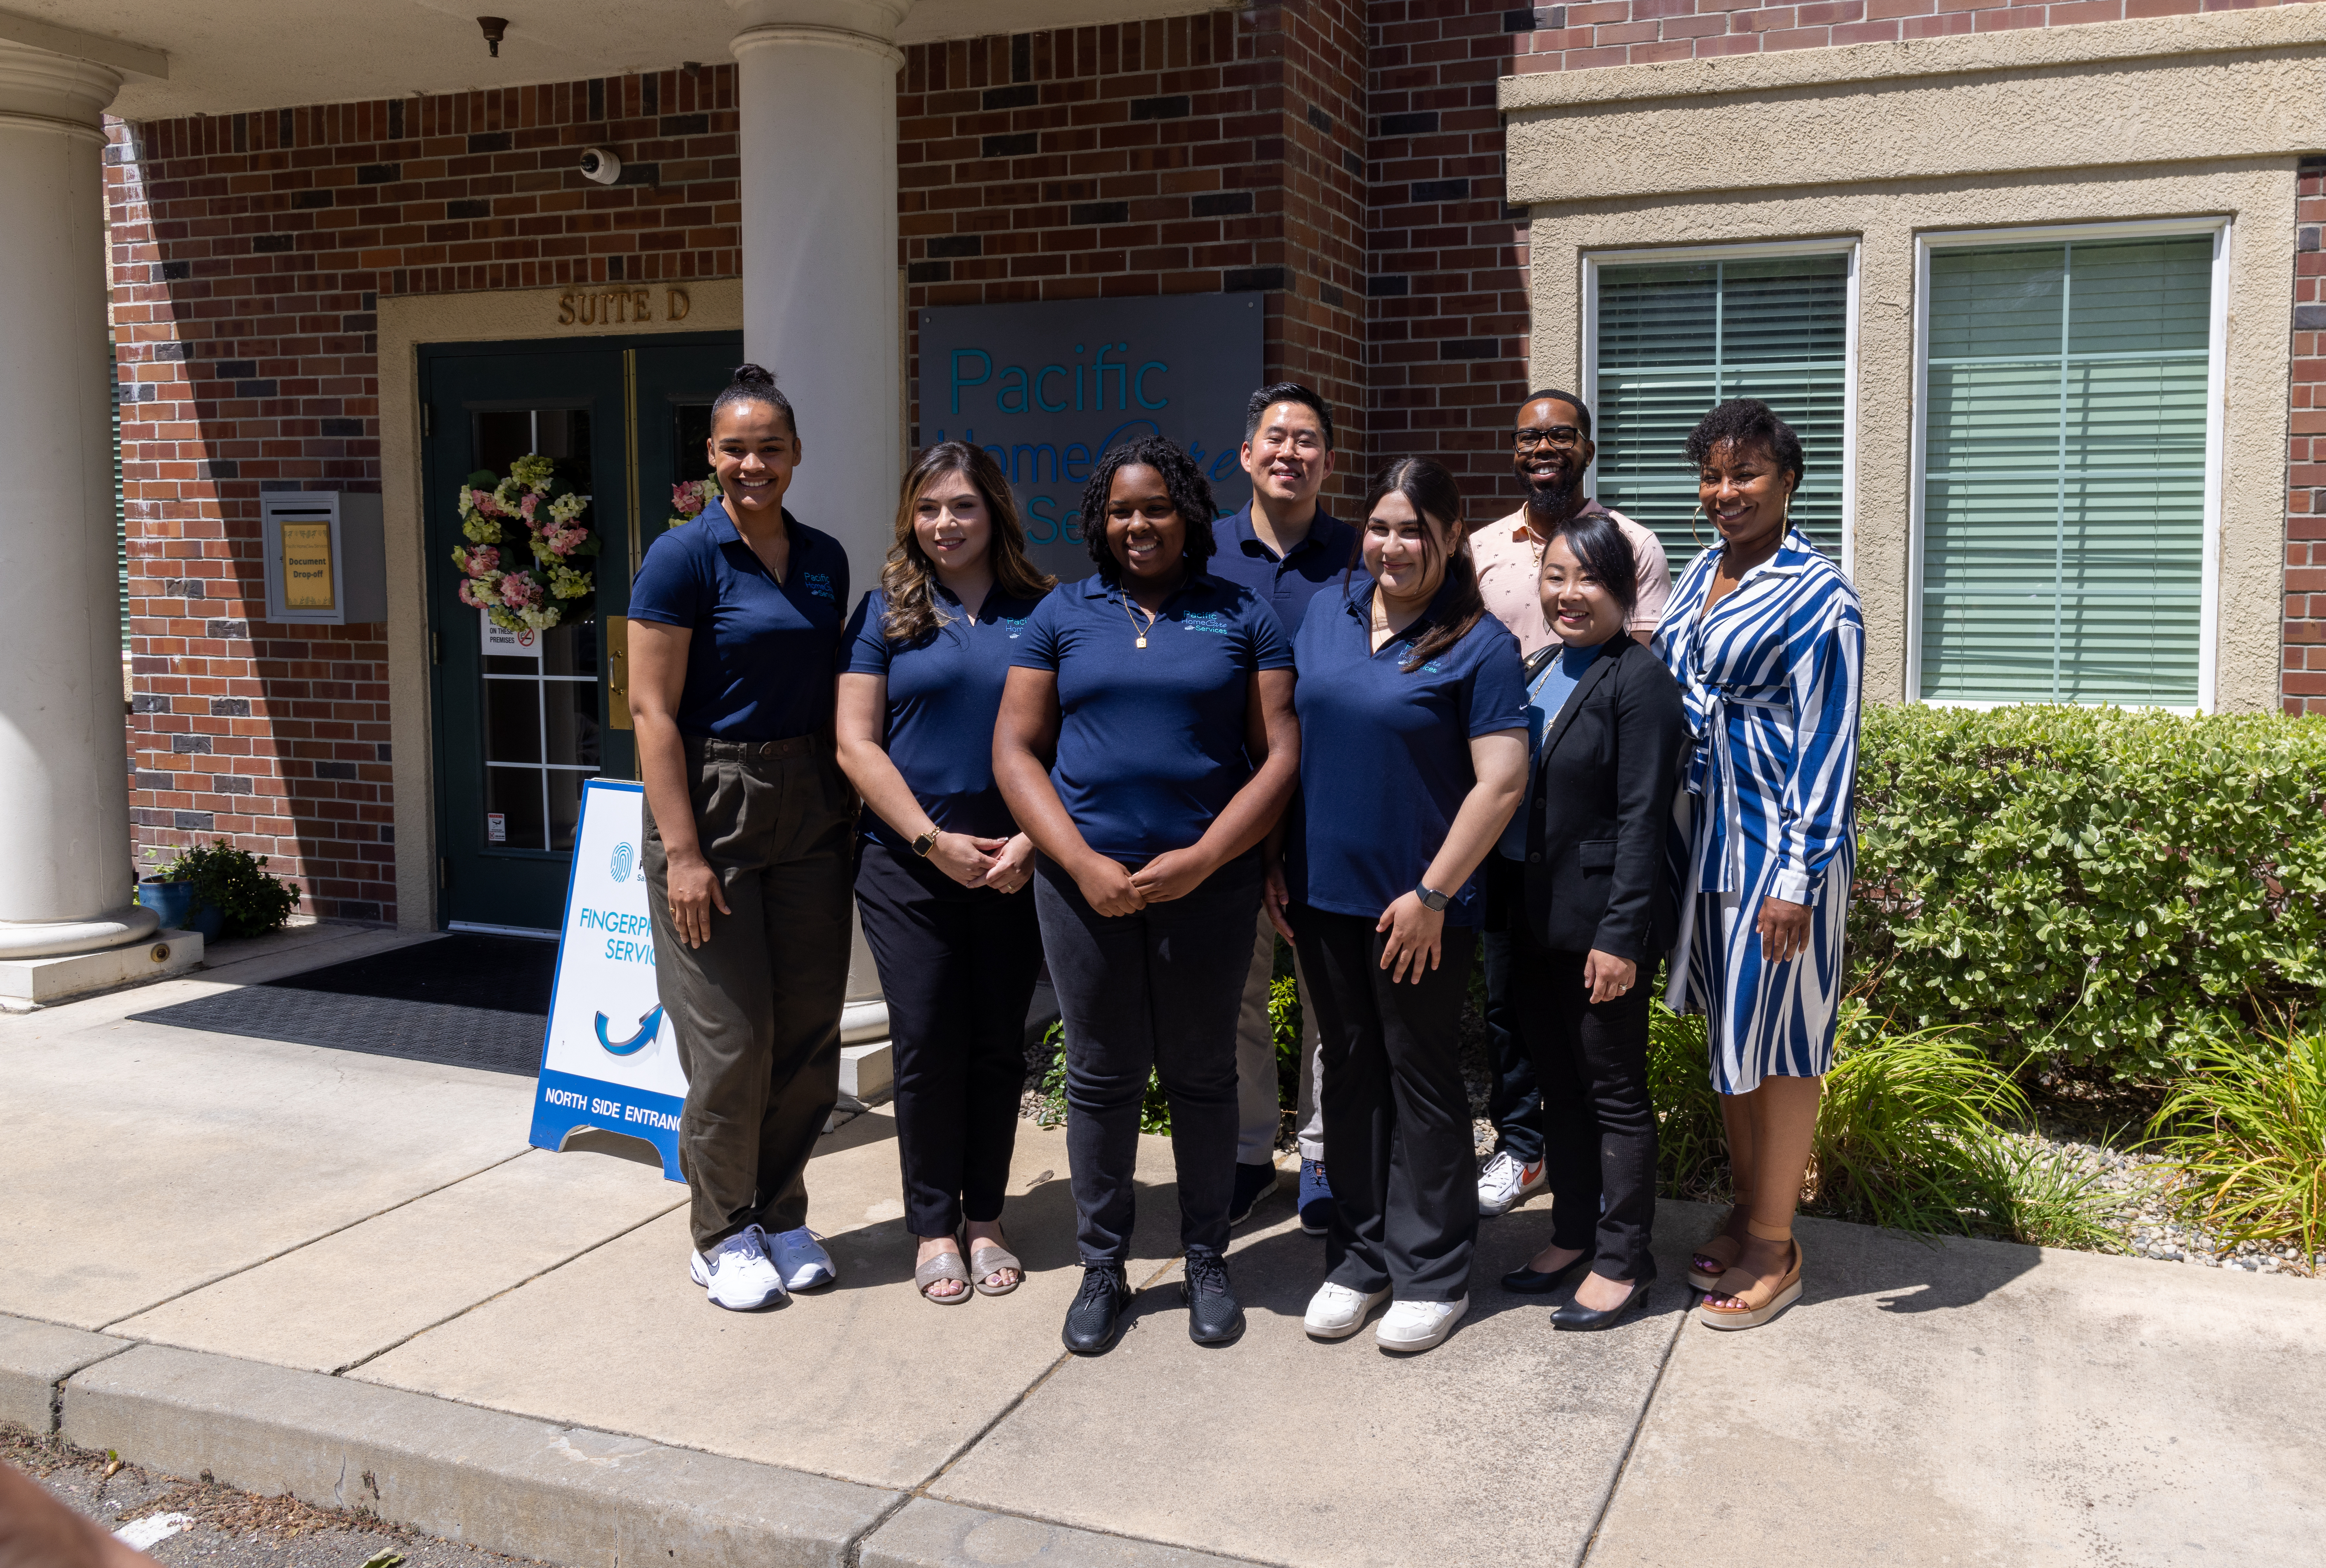 The image shows a group of eight professionals from Pacific Homecare Services posing together outside their office building. They are dressed in matching navy blue shirts, standing confidently in front of the building's entrance, which is marked by a sign that reads "Pacific Homecare Services." A welcoming wreath hangs on the door behind them, and a sign for fingerprint services is also visible, indicating the range of services offered by their office.